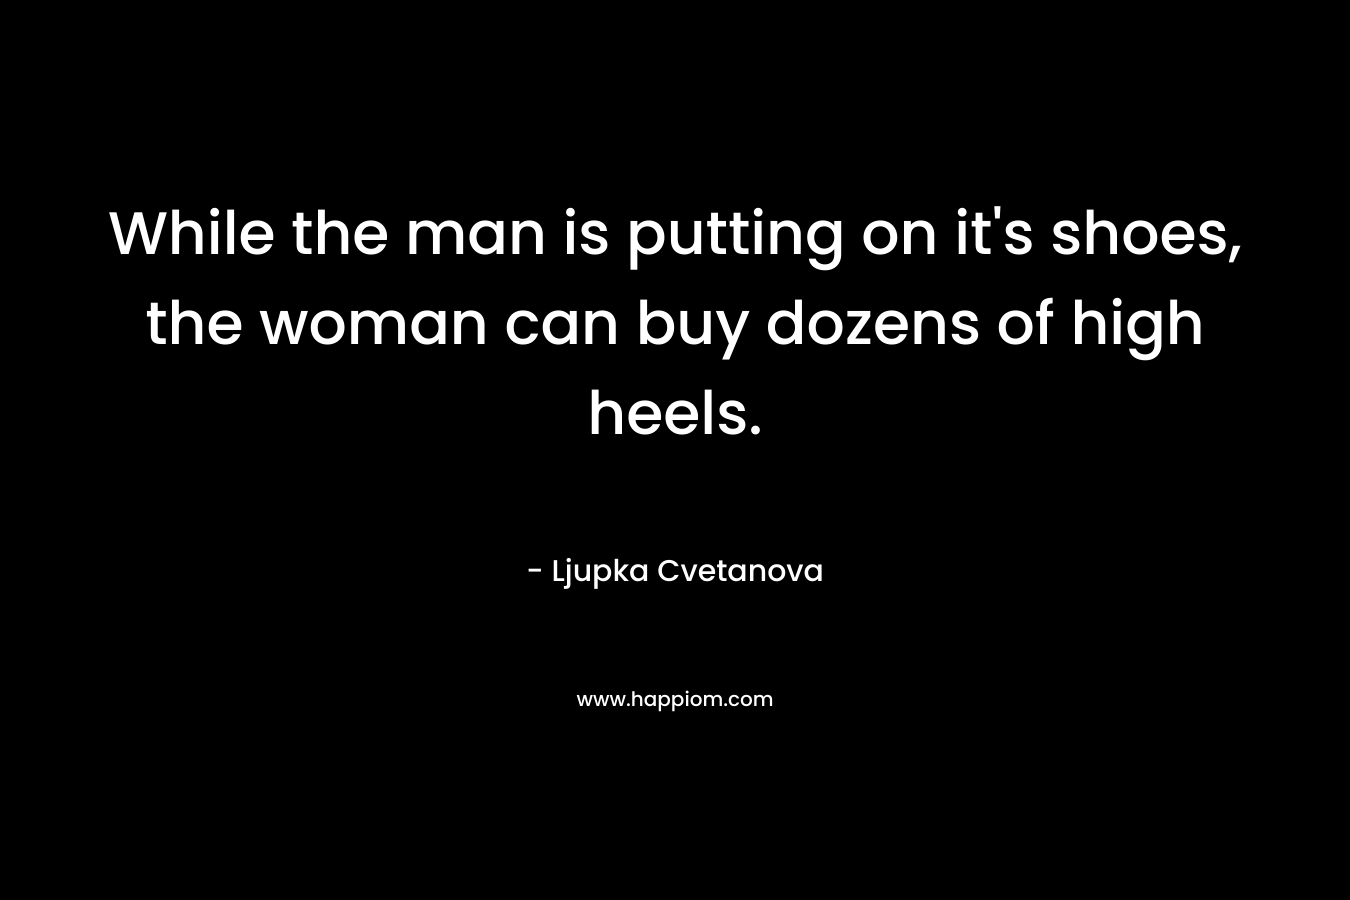 While the man is putting on it’s shoes, the woman can buy dozens of high heels. – Ljupka Cvetanova